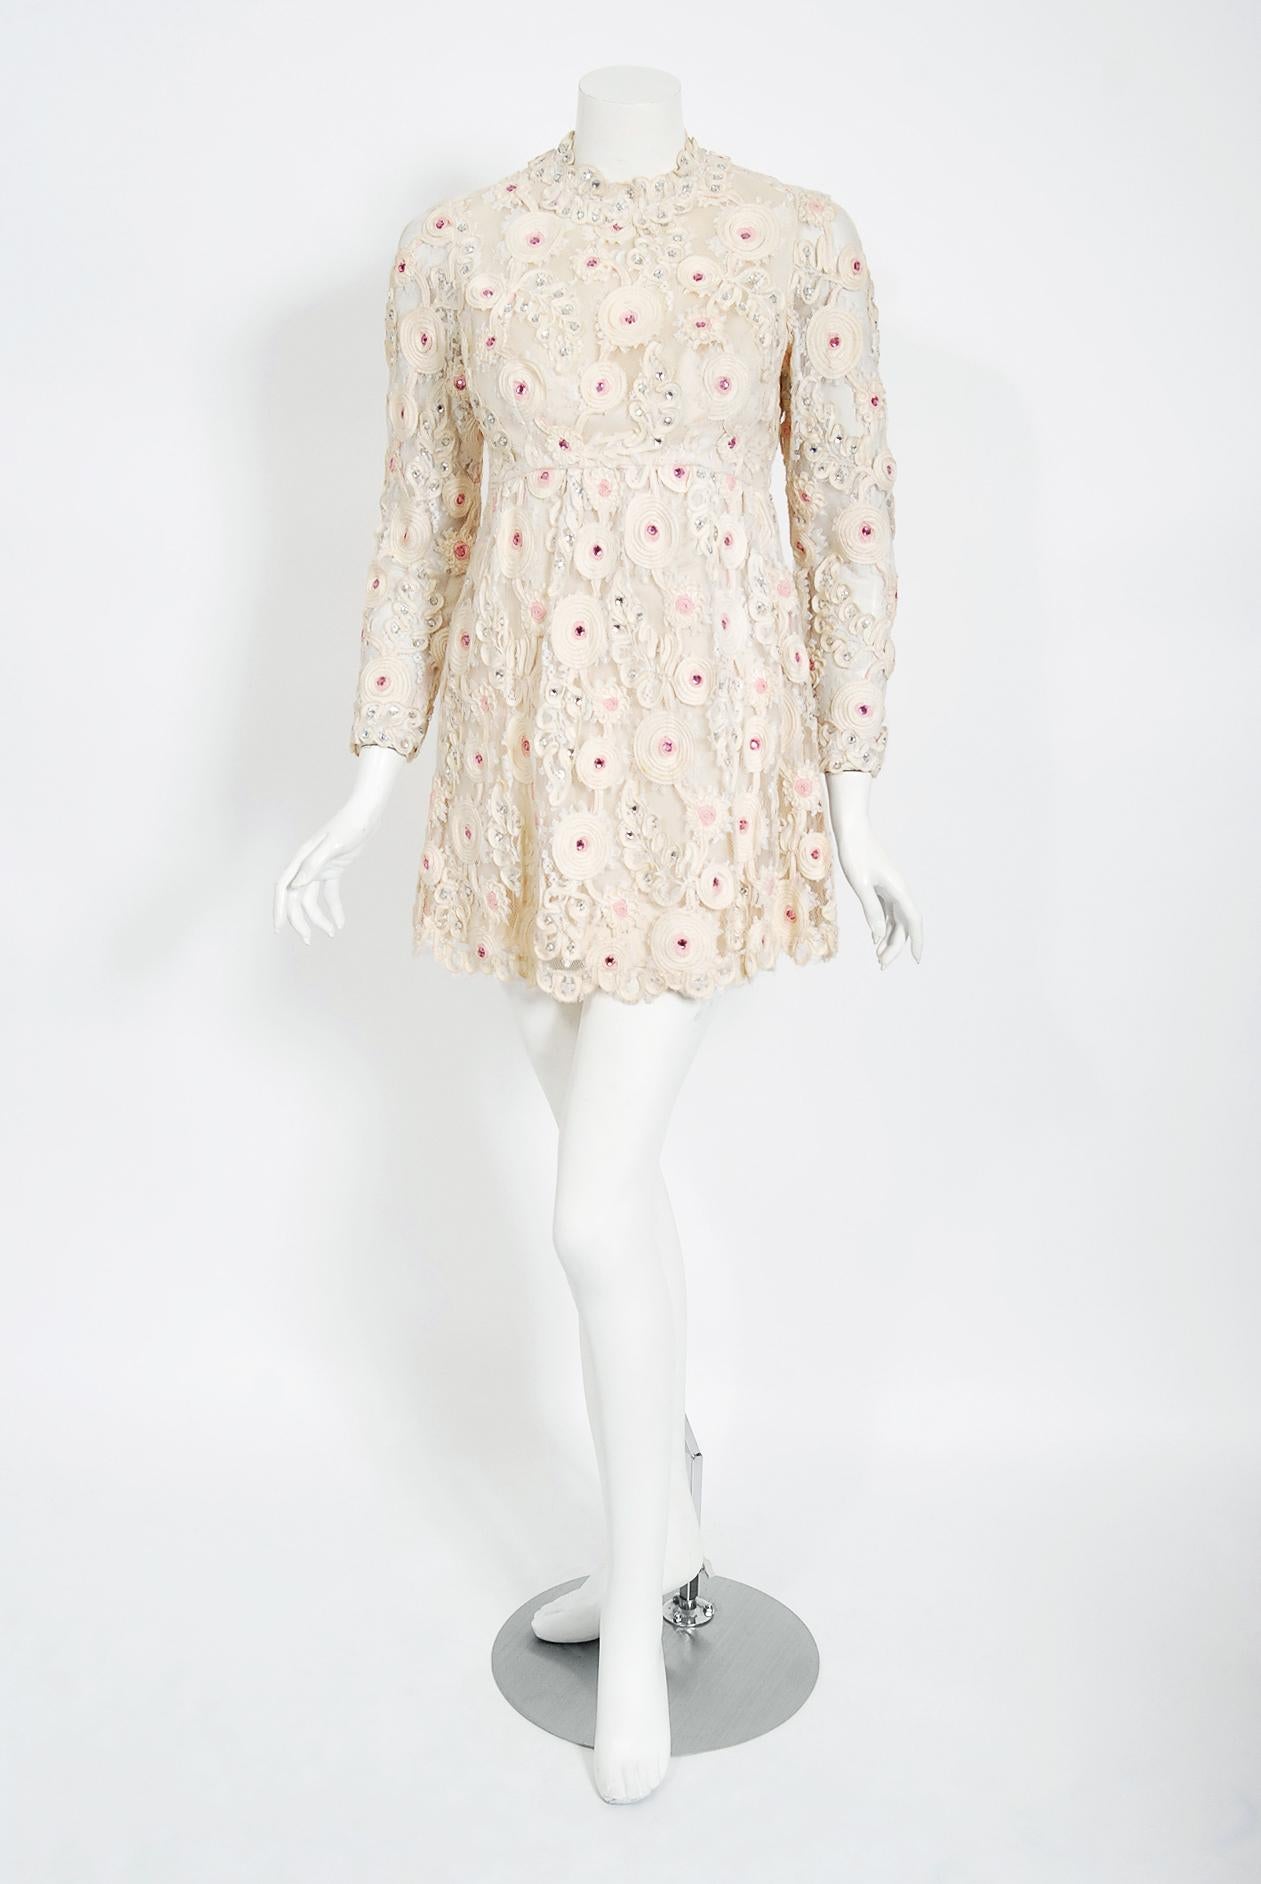 A truly wonderful and striking 1960's mini dress from the bridal department at Henri Bendel. Established in 1895, Henri Bendel was an American upscale women's specialty store based in New York City that sold high-end couture fashion. Henri Bendel